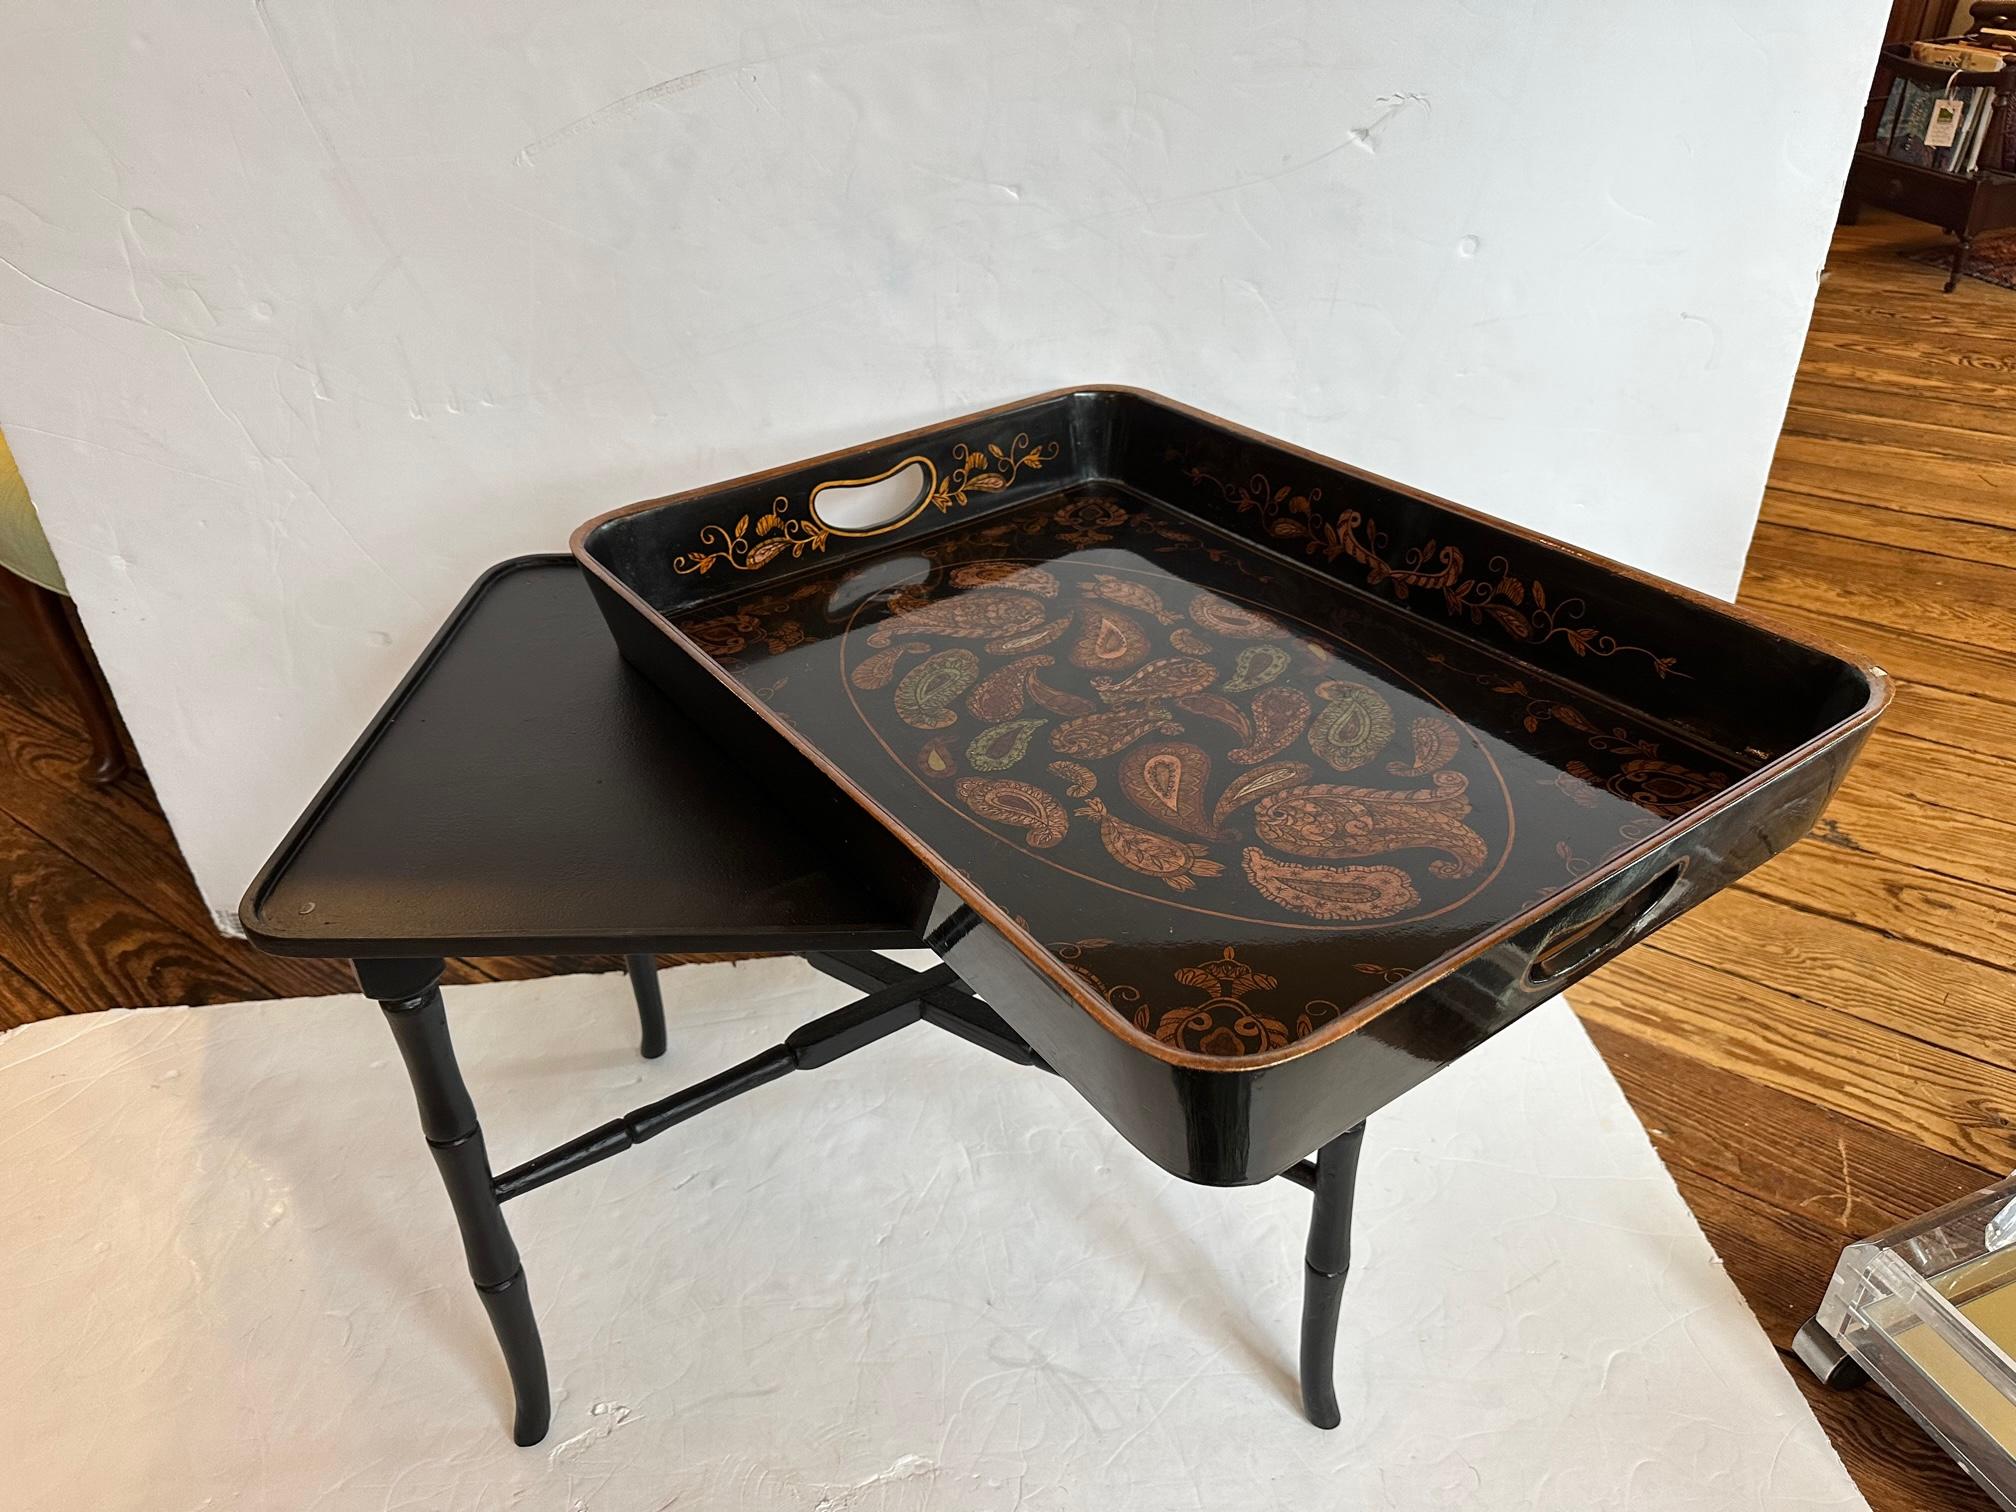 Black lacquer tray with paisley design in gold, probably from late 80's/early 90's, sitting on a delicate bamboo style ebonized stand which has been recently repainted in satin black. A recent touchup to a small chip in lacquered top is visible. 